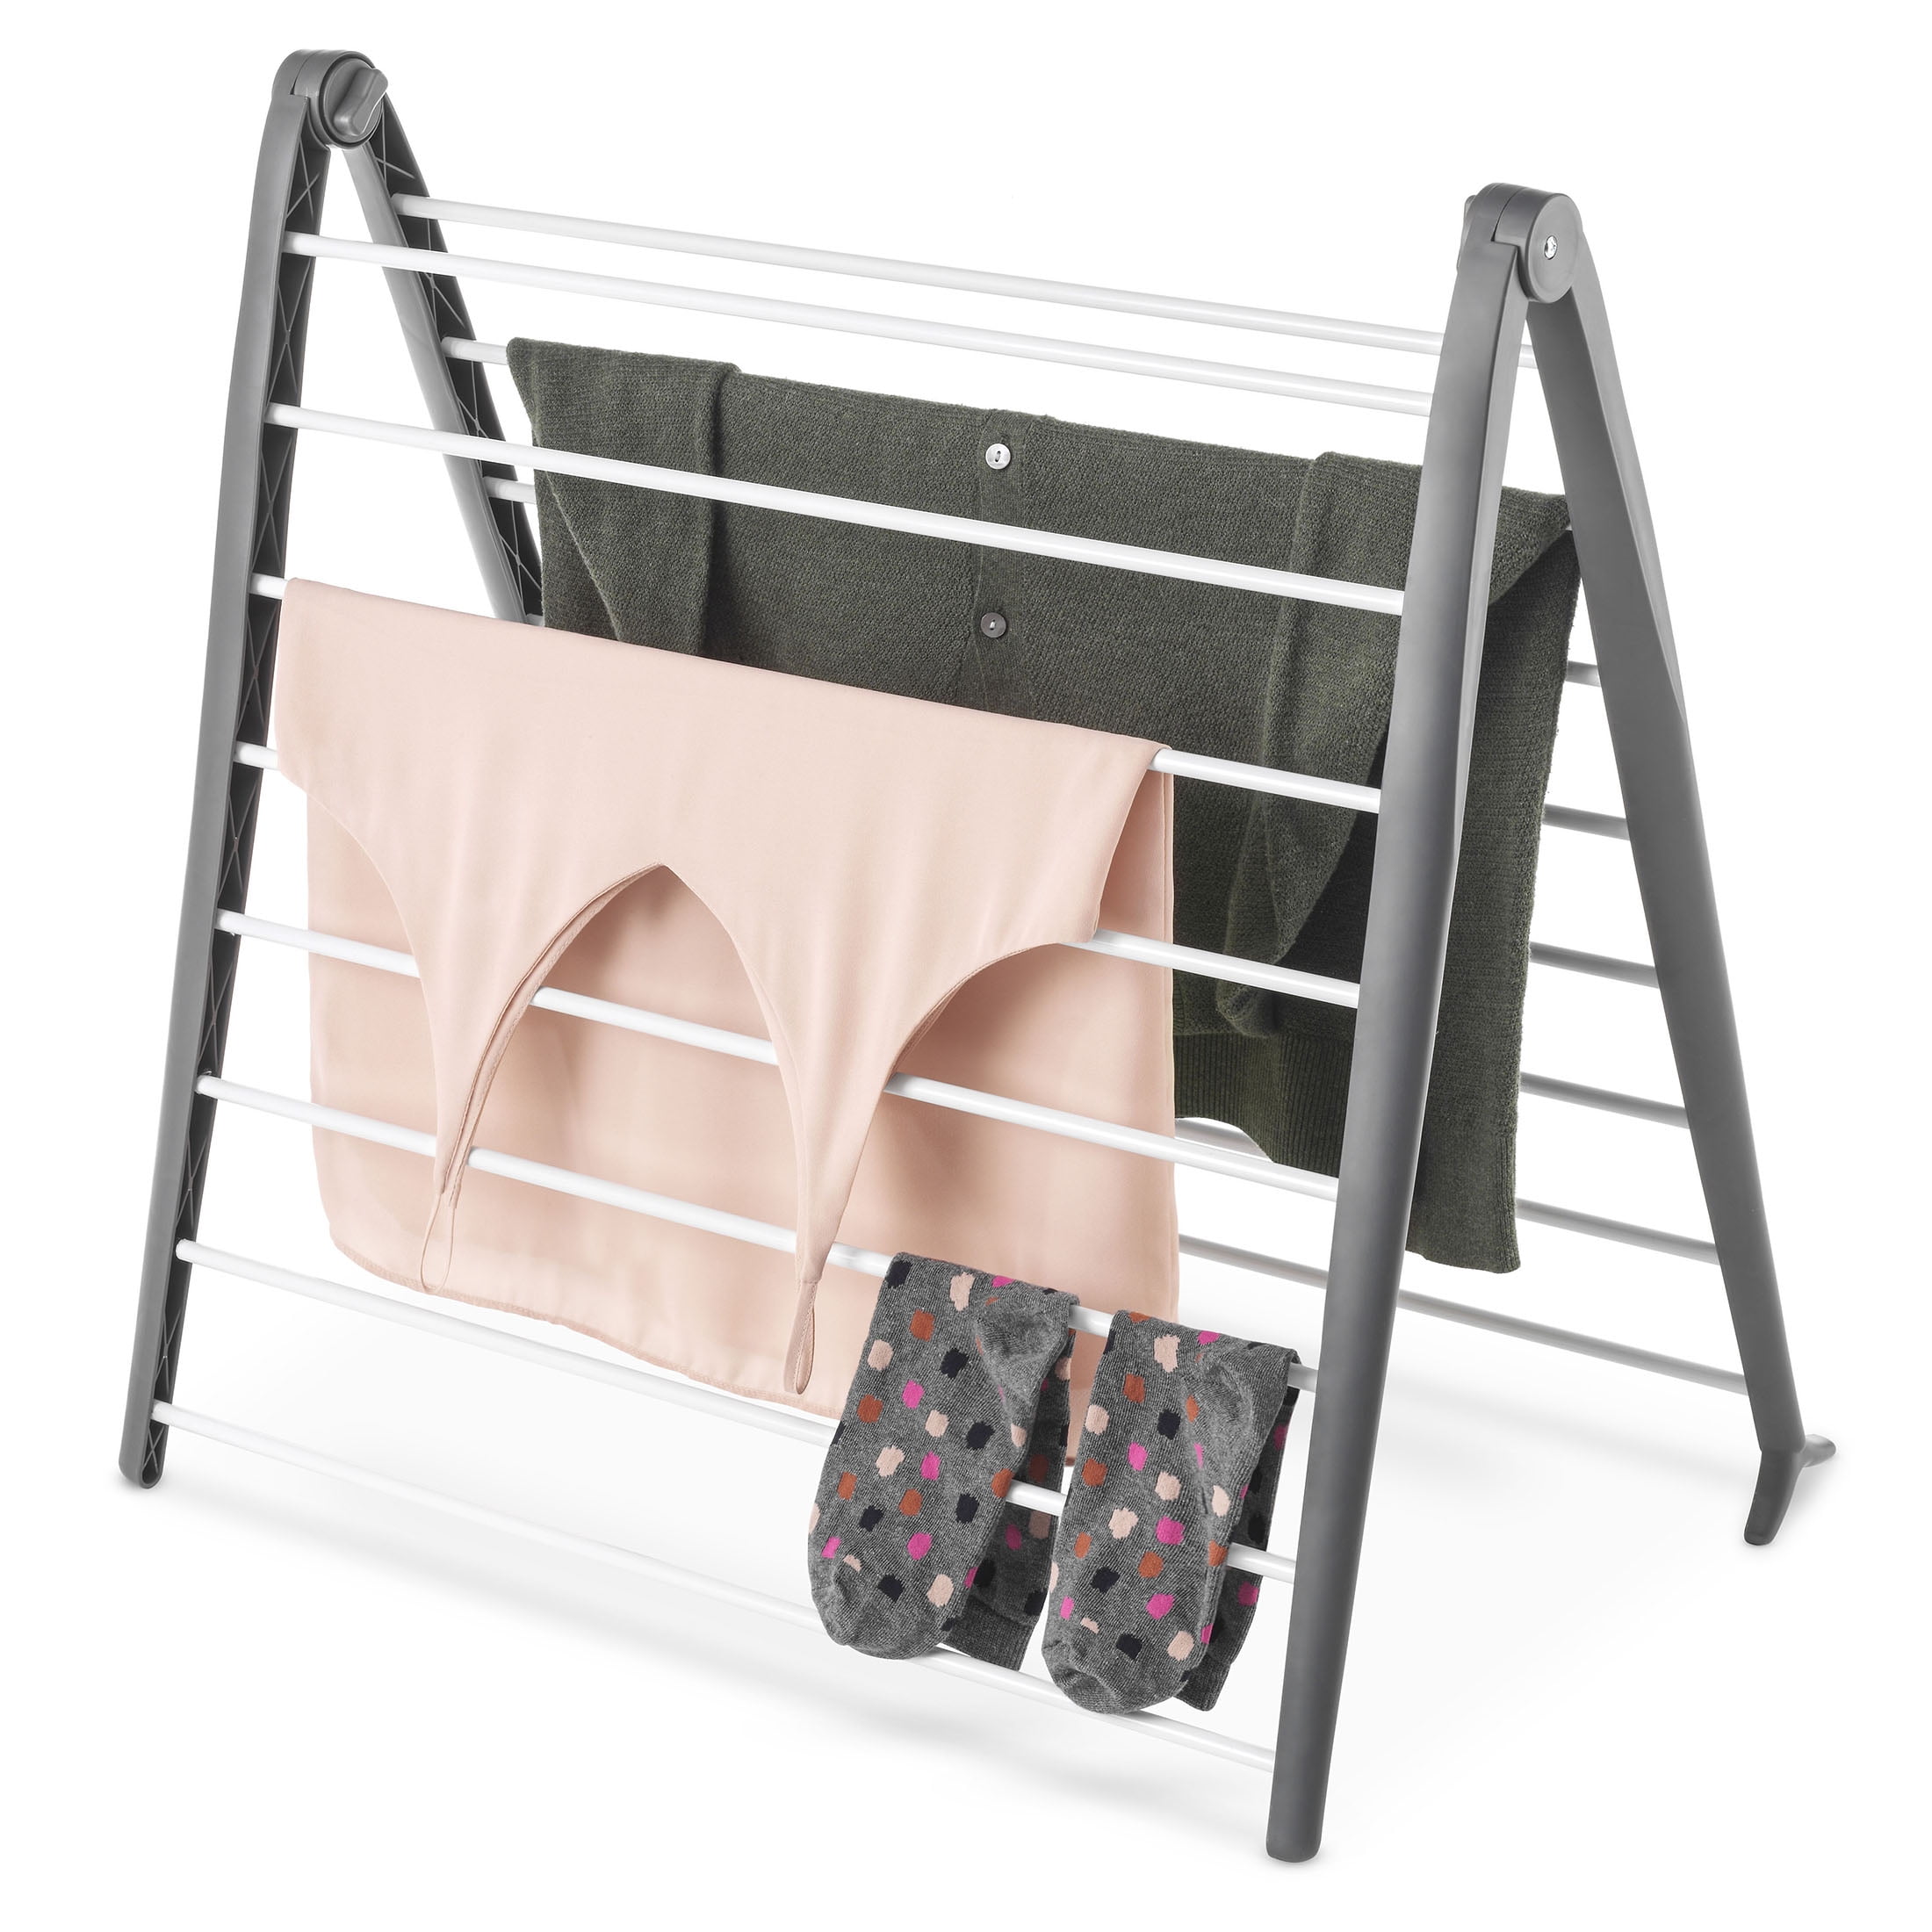 Della 15KG Compact Electric Portable Energy Saving Clothing Dryer Rack for  Homes, Dorms, Convenient in 30 Minutes - standard - Bed Bath & Beyond -  18729843